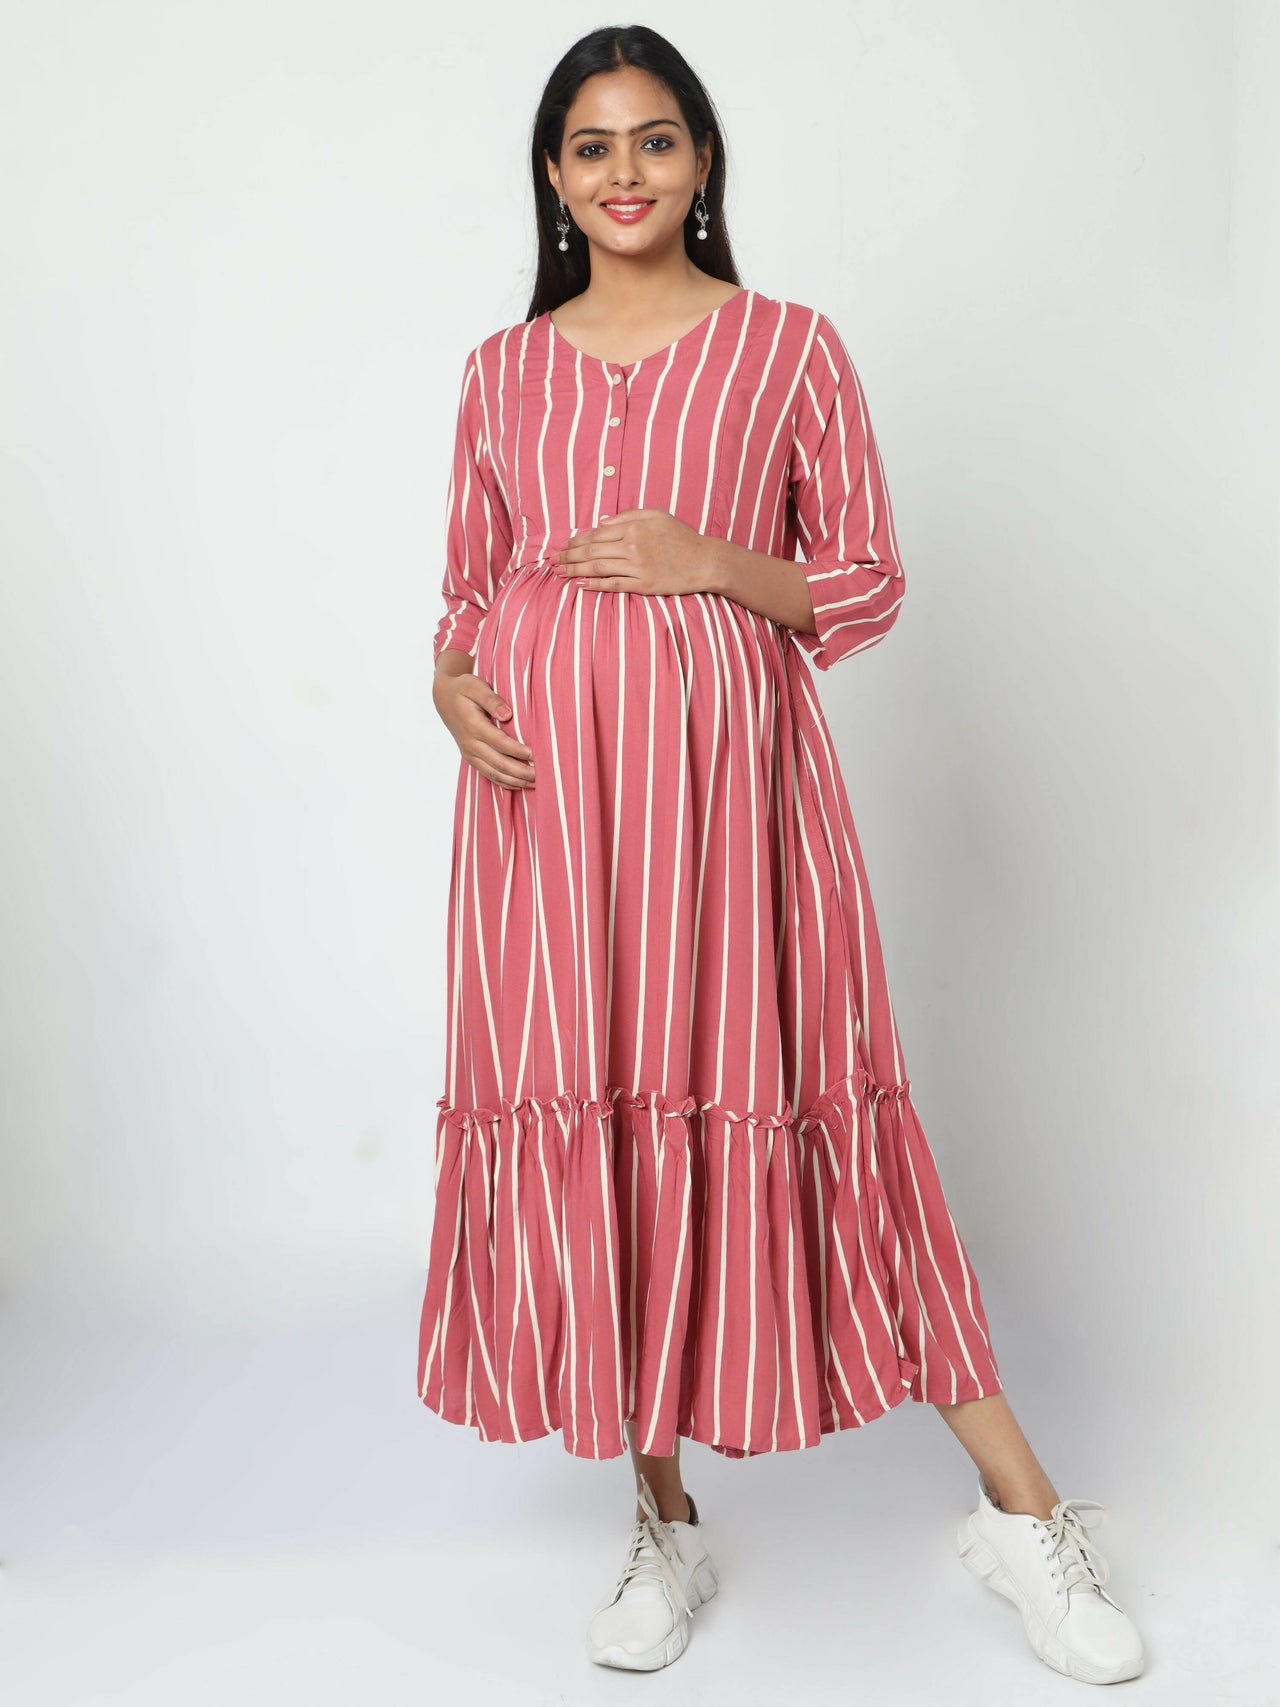 Manet Three Fourth Maternity Dress Striped With Concealed Zipper Nursing Access - Pink - Distacart